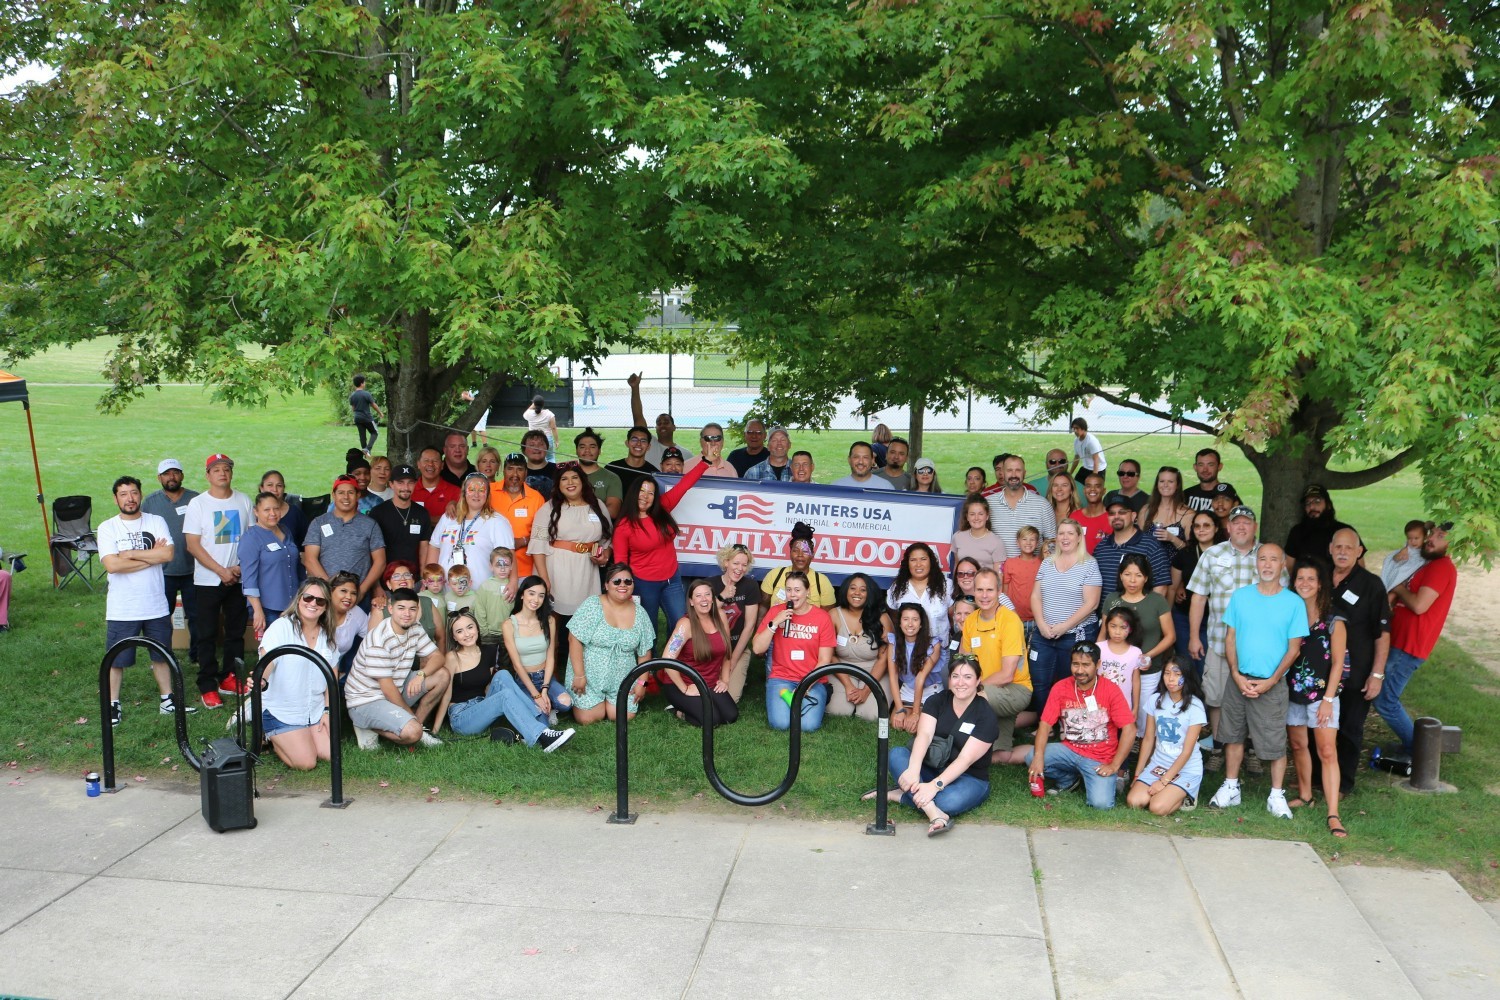 Our annual Family Palooza event brings employees and their families together for a day of fun!